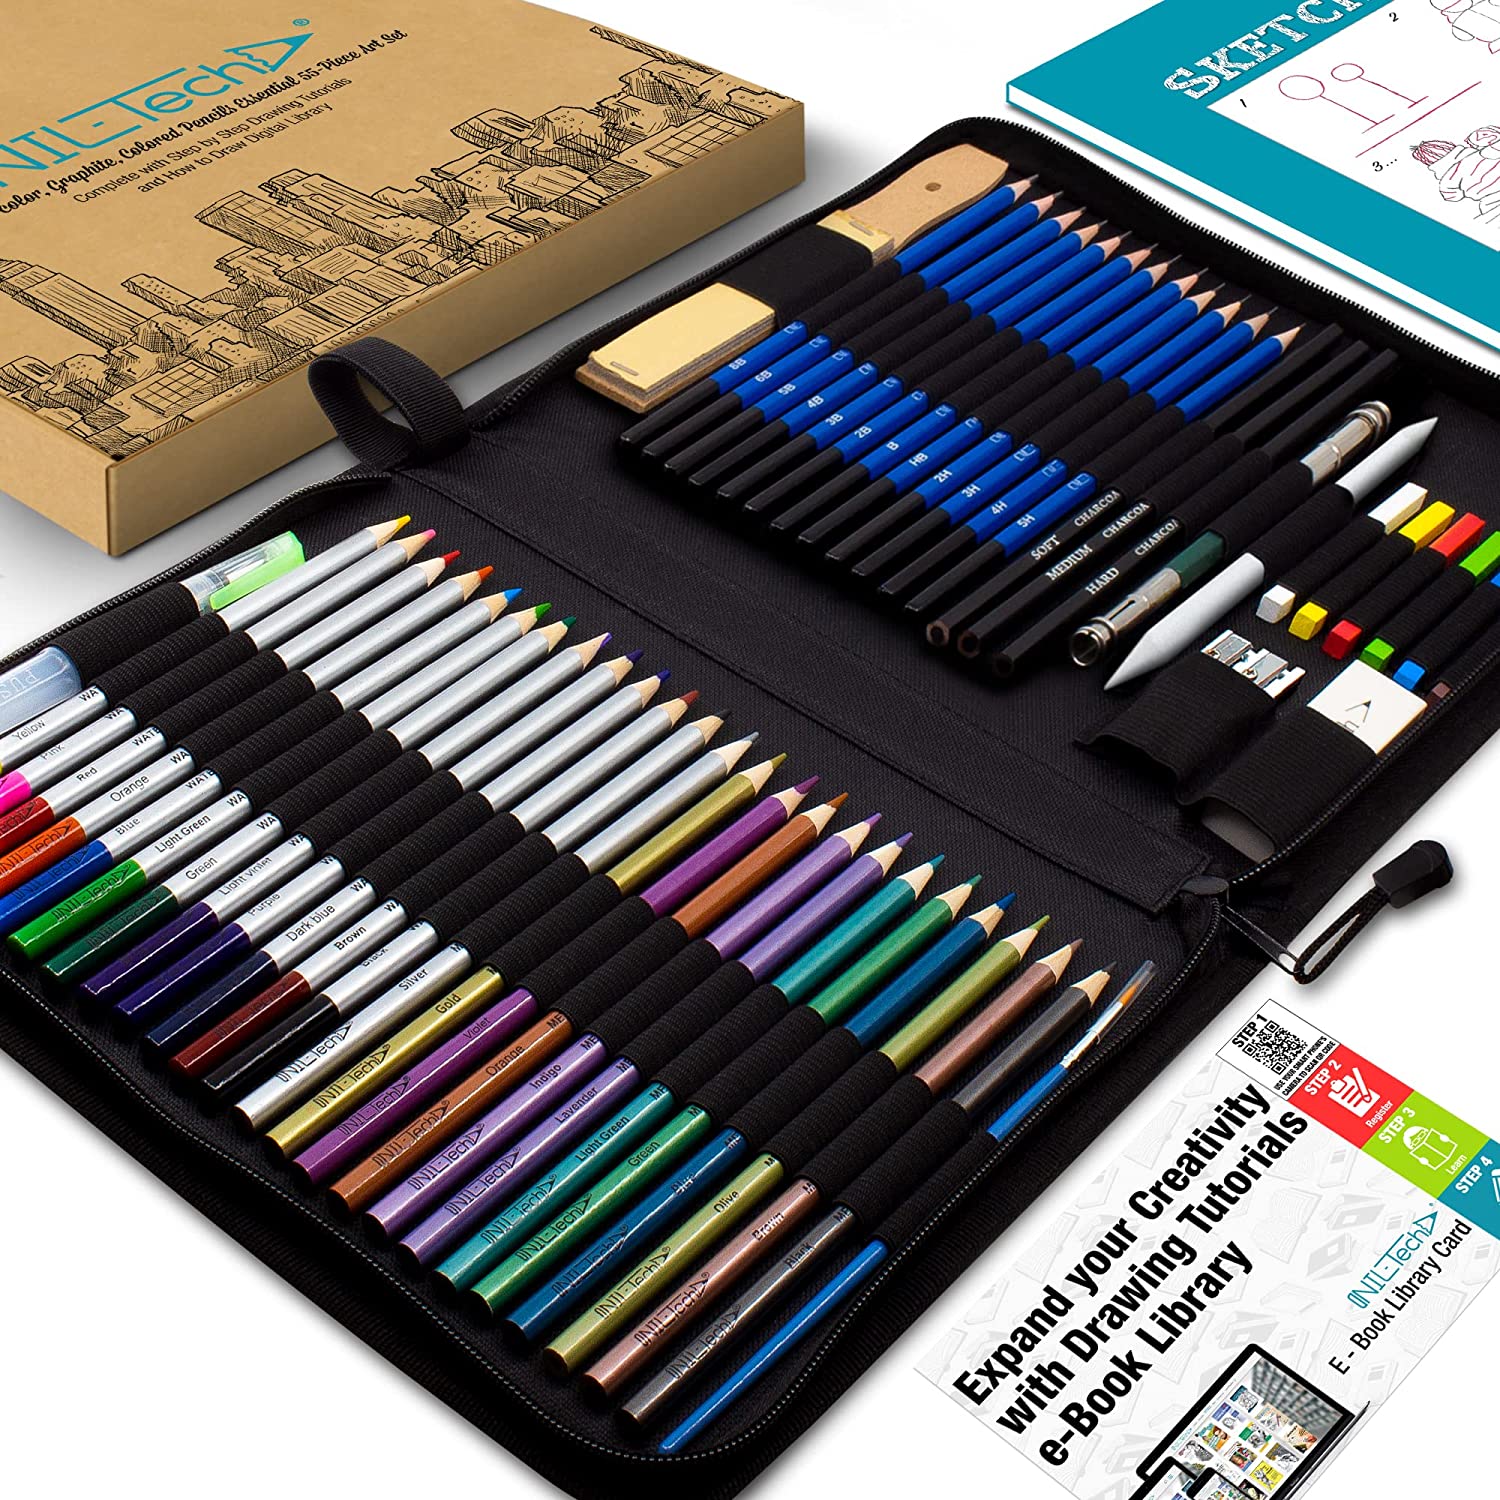 Deluxe Professional Art Kit Drawing Sketching Set Colored Pencils Artist  Tools | eBay